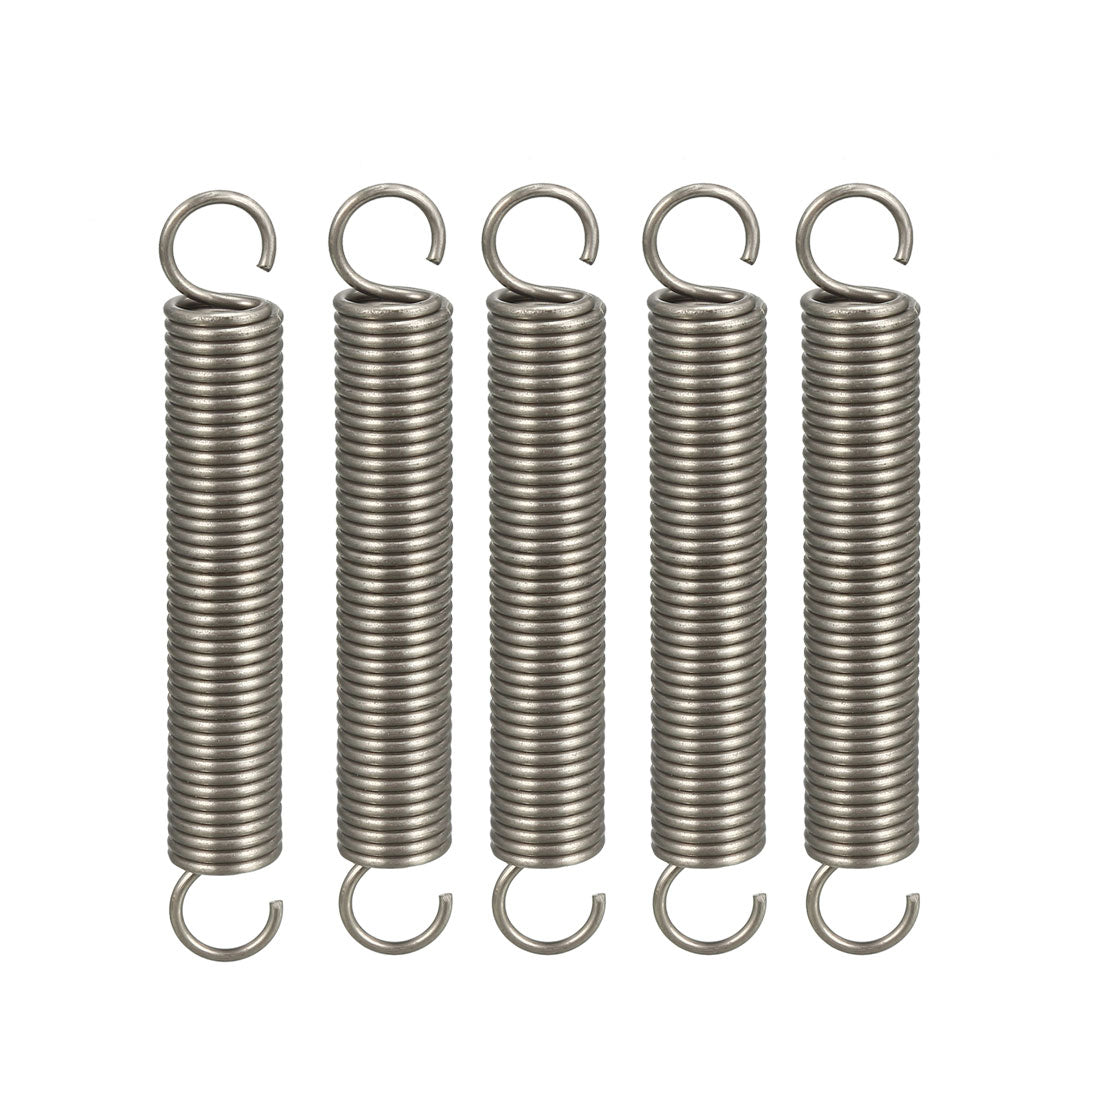 uxcell Uxcell Extended Compressed Spring Wire Diameter 0.047" , OD 0.39" , Free Length 2.76" Stainless Steel Small Dual Hook Tension Spring 5pcs